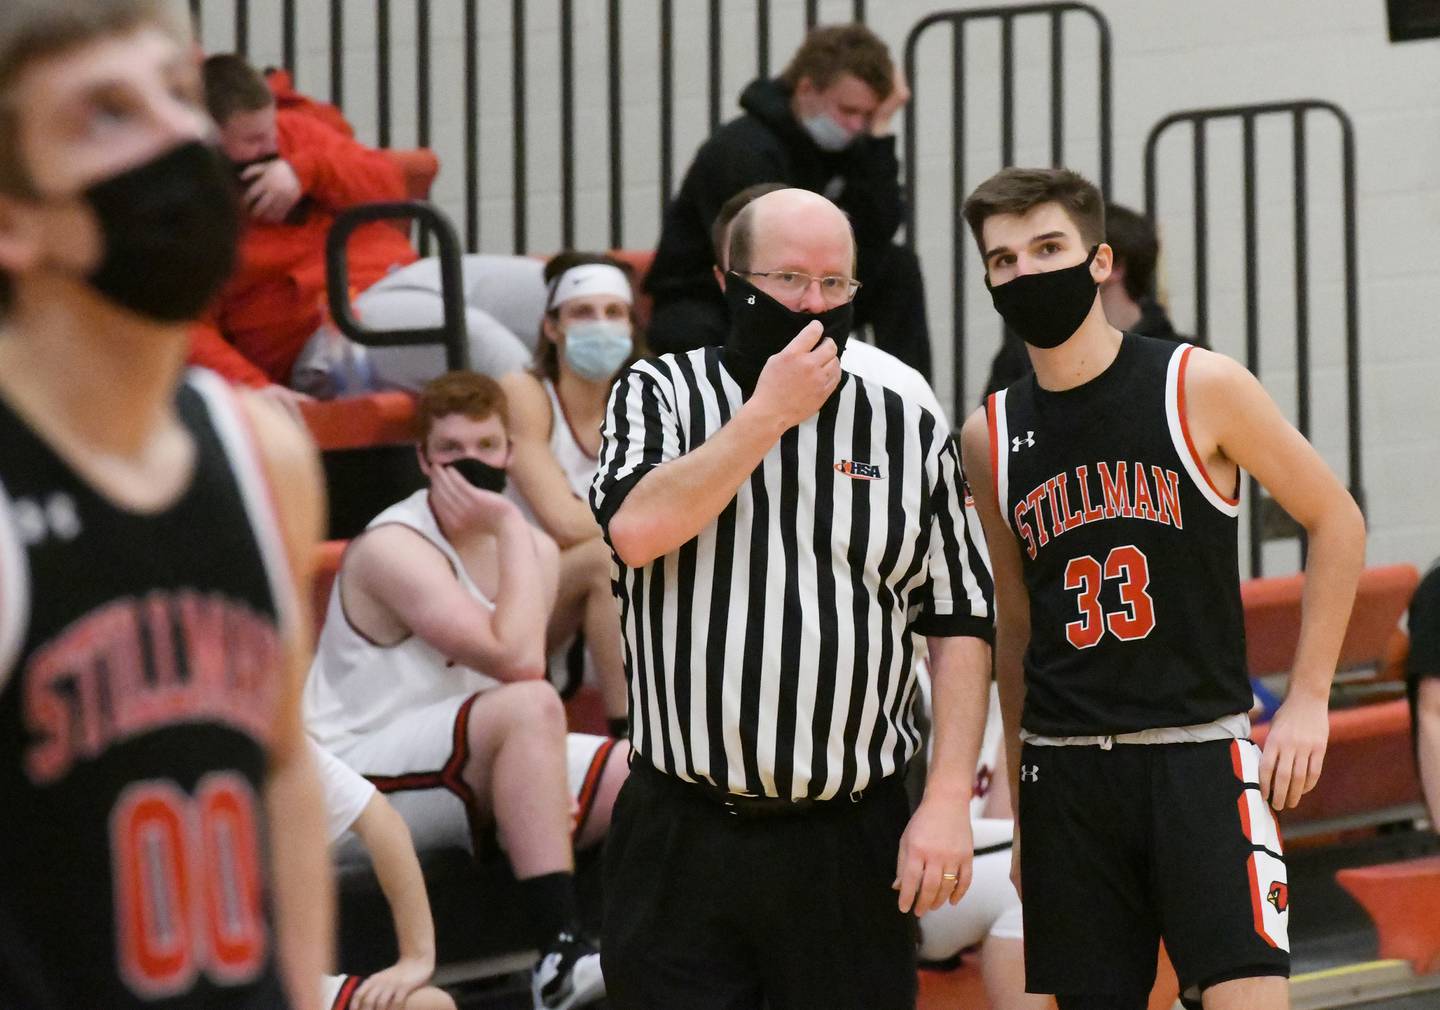 Basketball officials must wear masks when officiating games. Here, an official chats with Stillman Valley's David Wilhite during a game with Forreston.